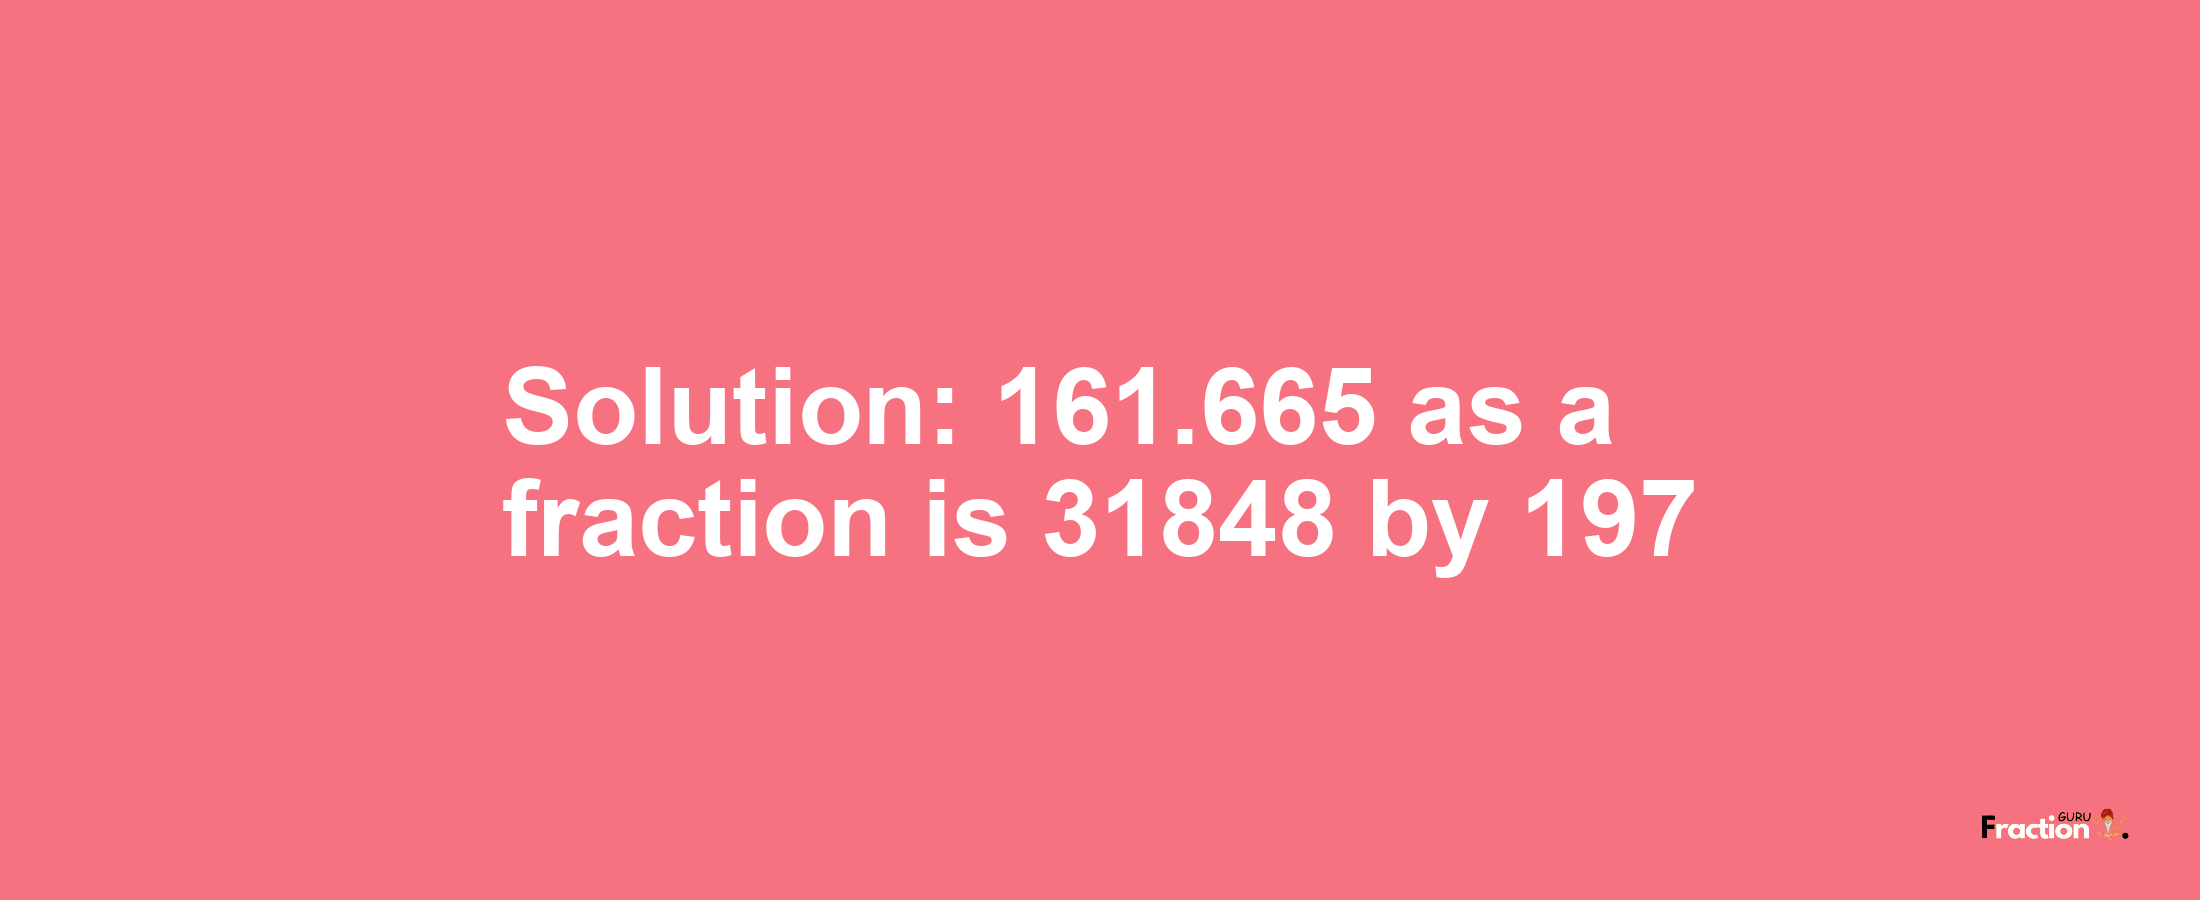 Solution:161.665 as a fraction is 31848/197